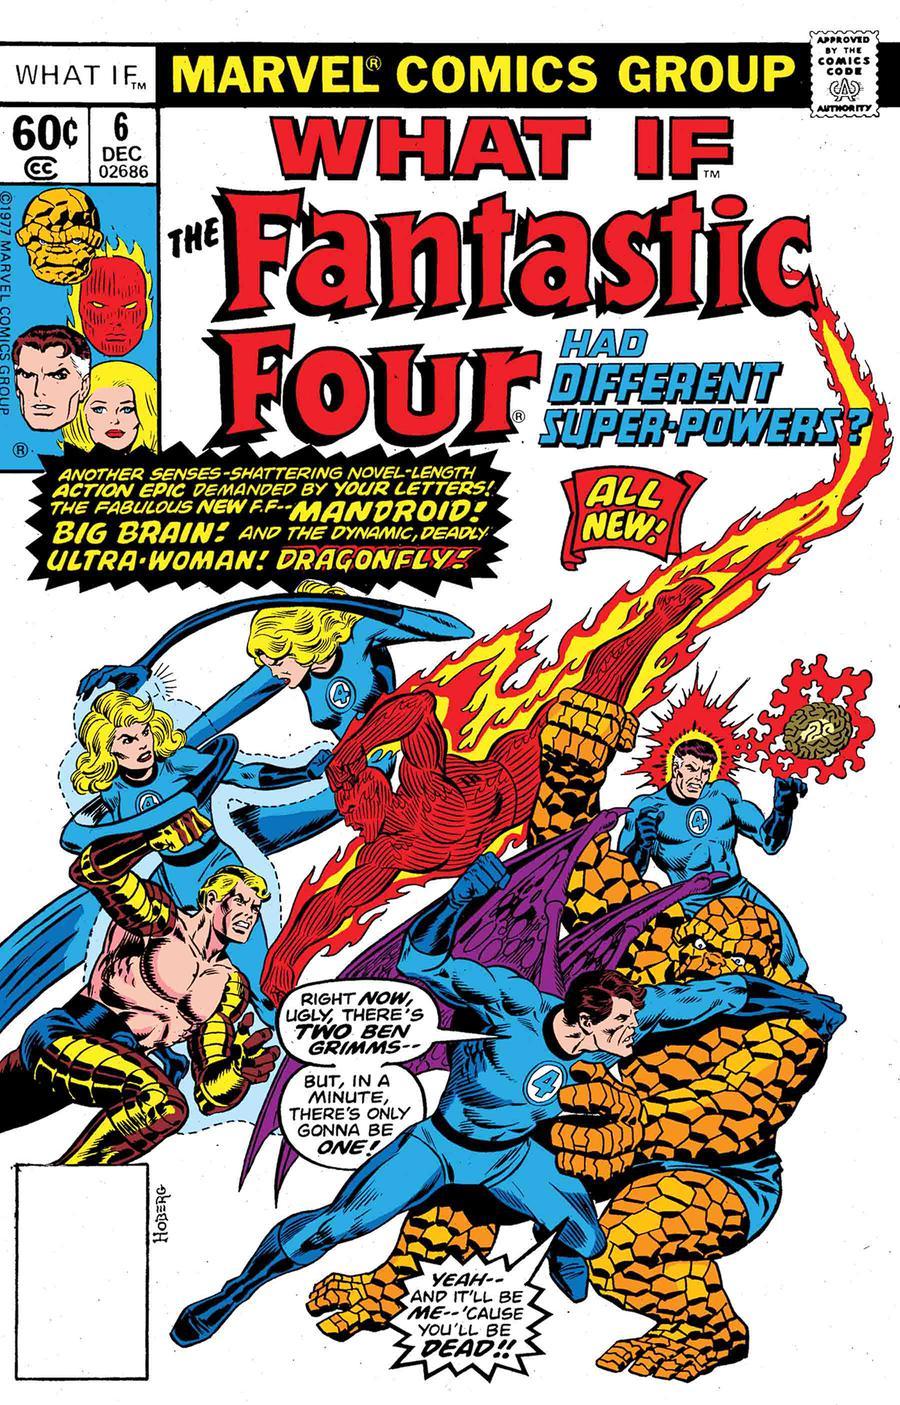 True Believers What If The Fantastic Four Had Different Super-Powers Vol. 1 #1